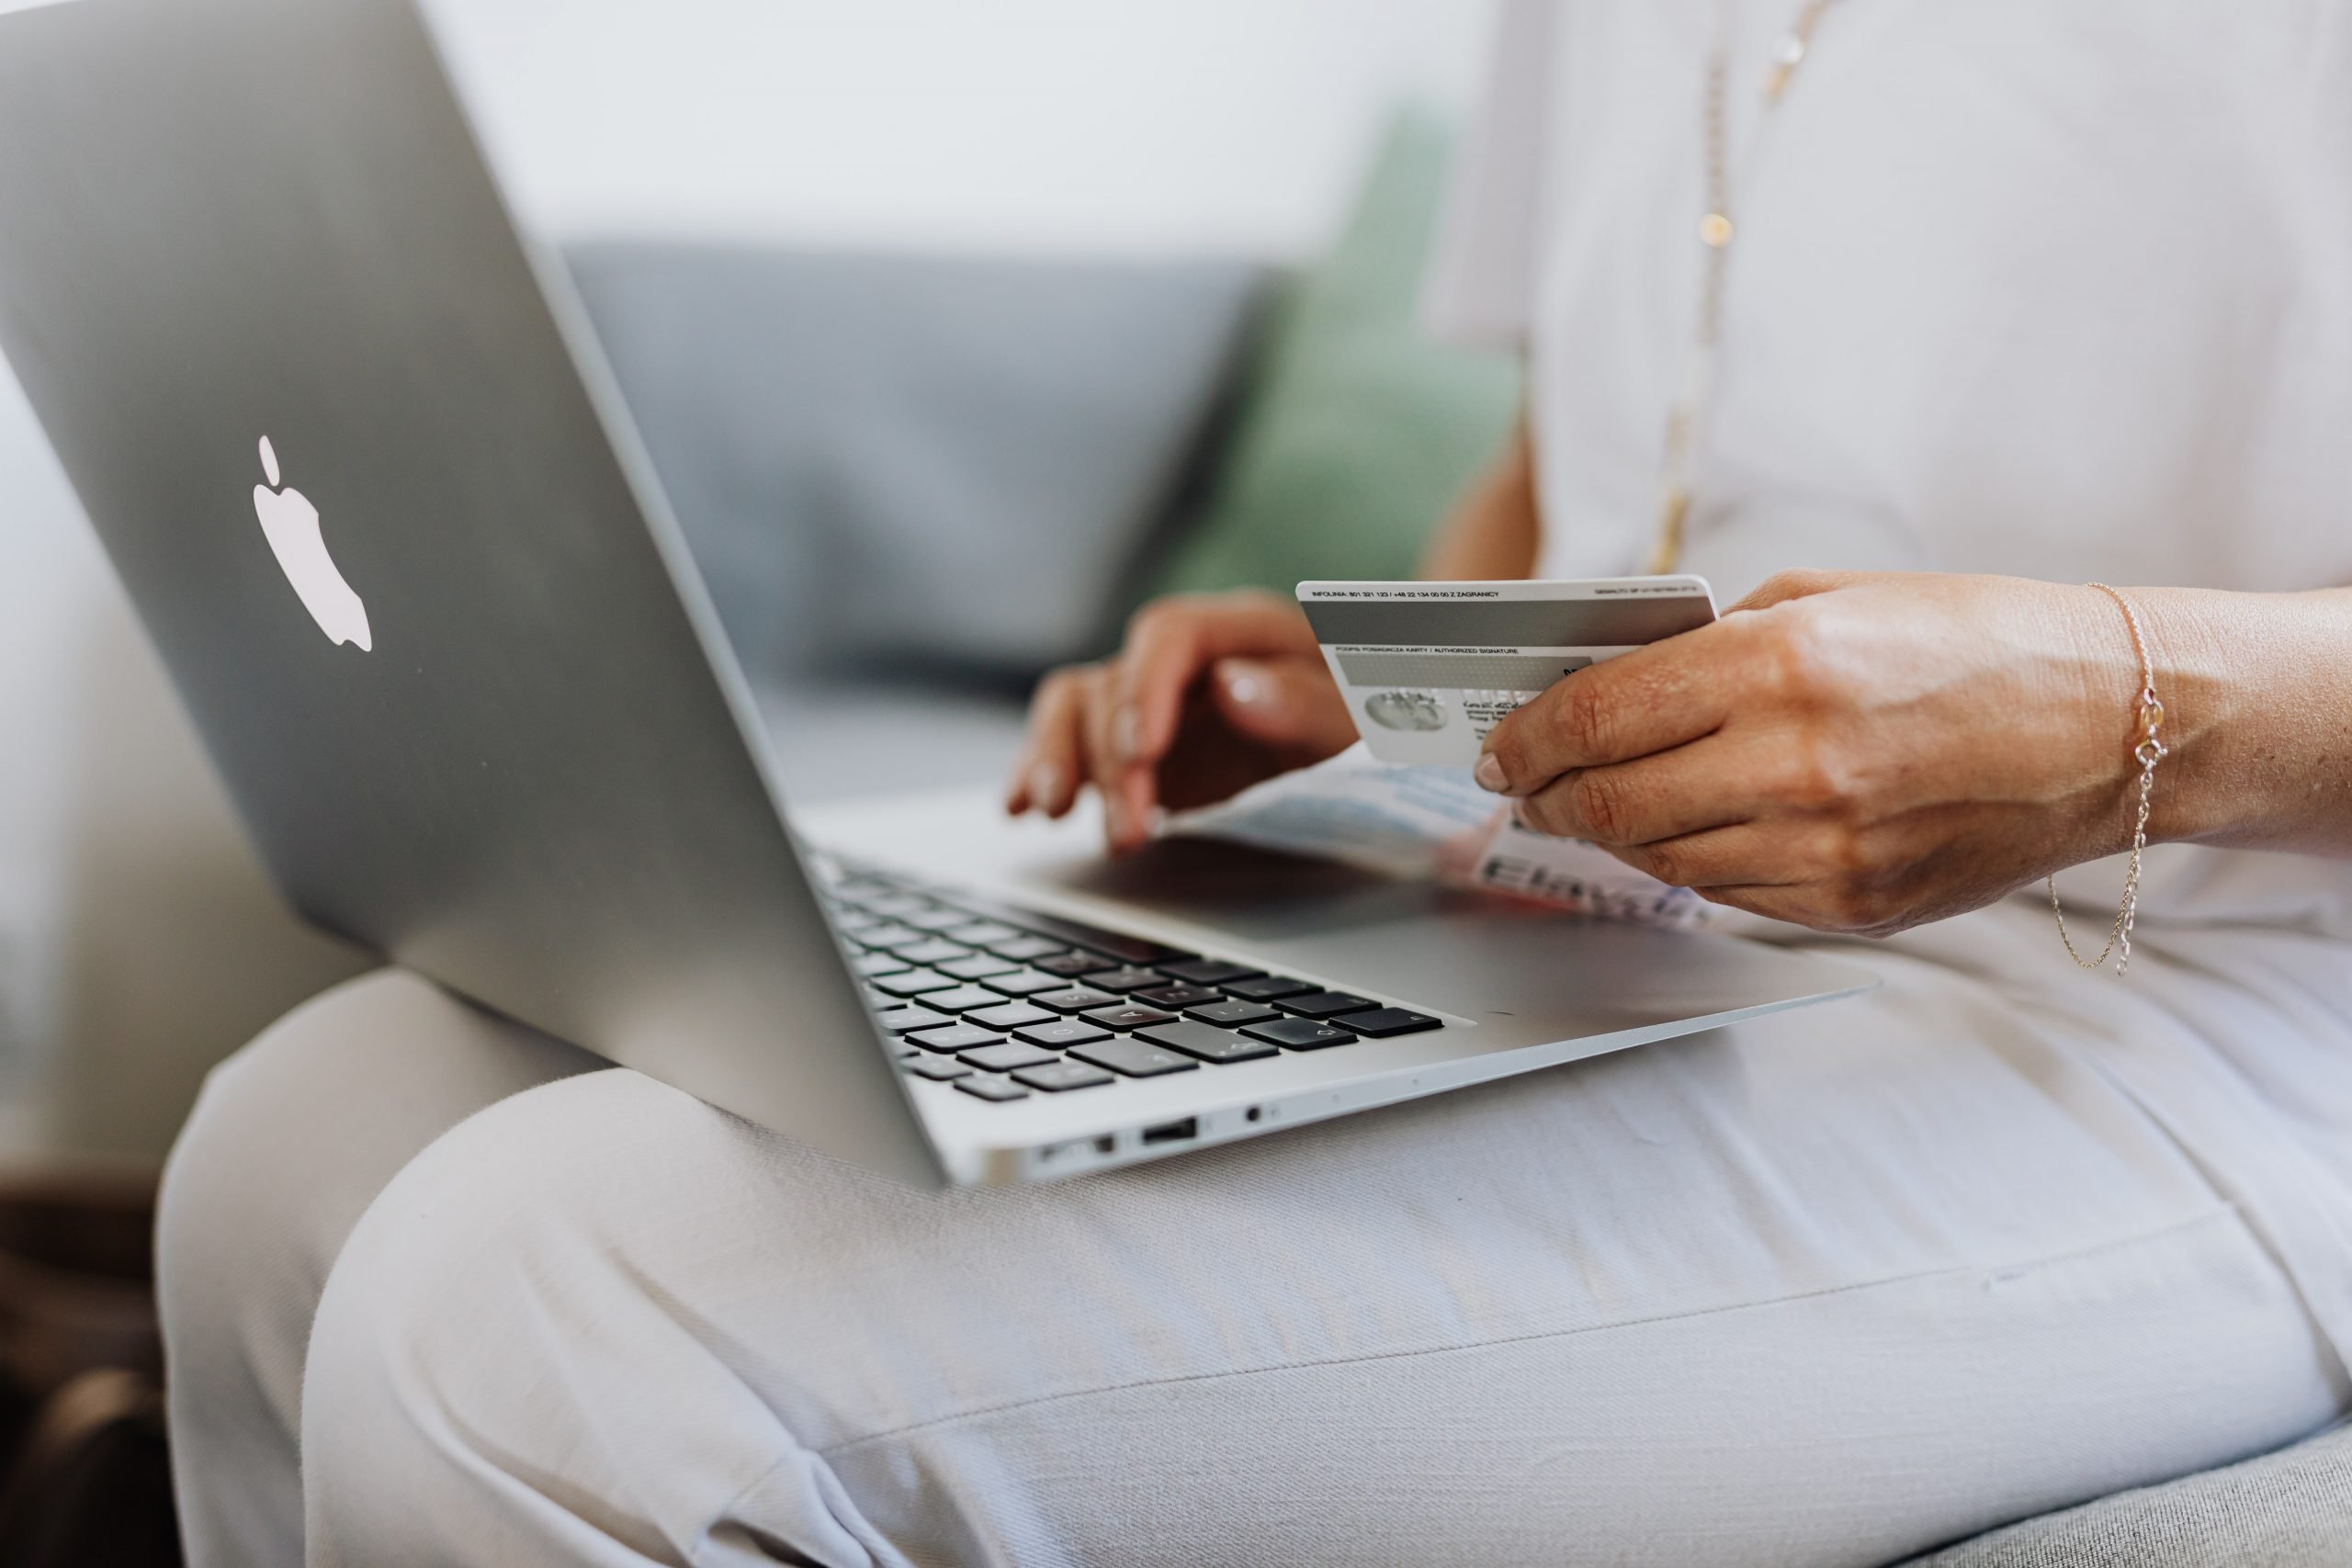 Woman making an e-commerce purchase